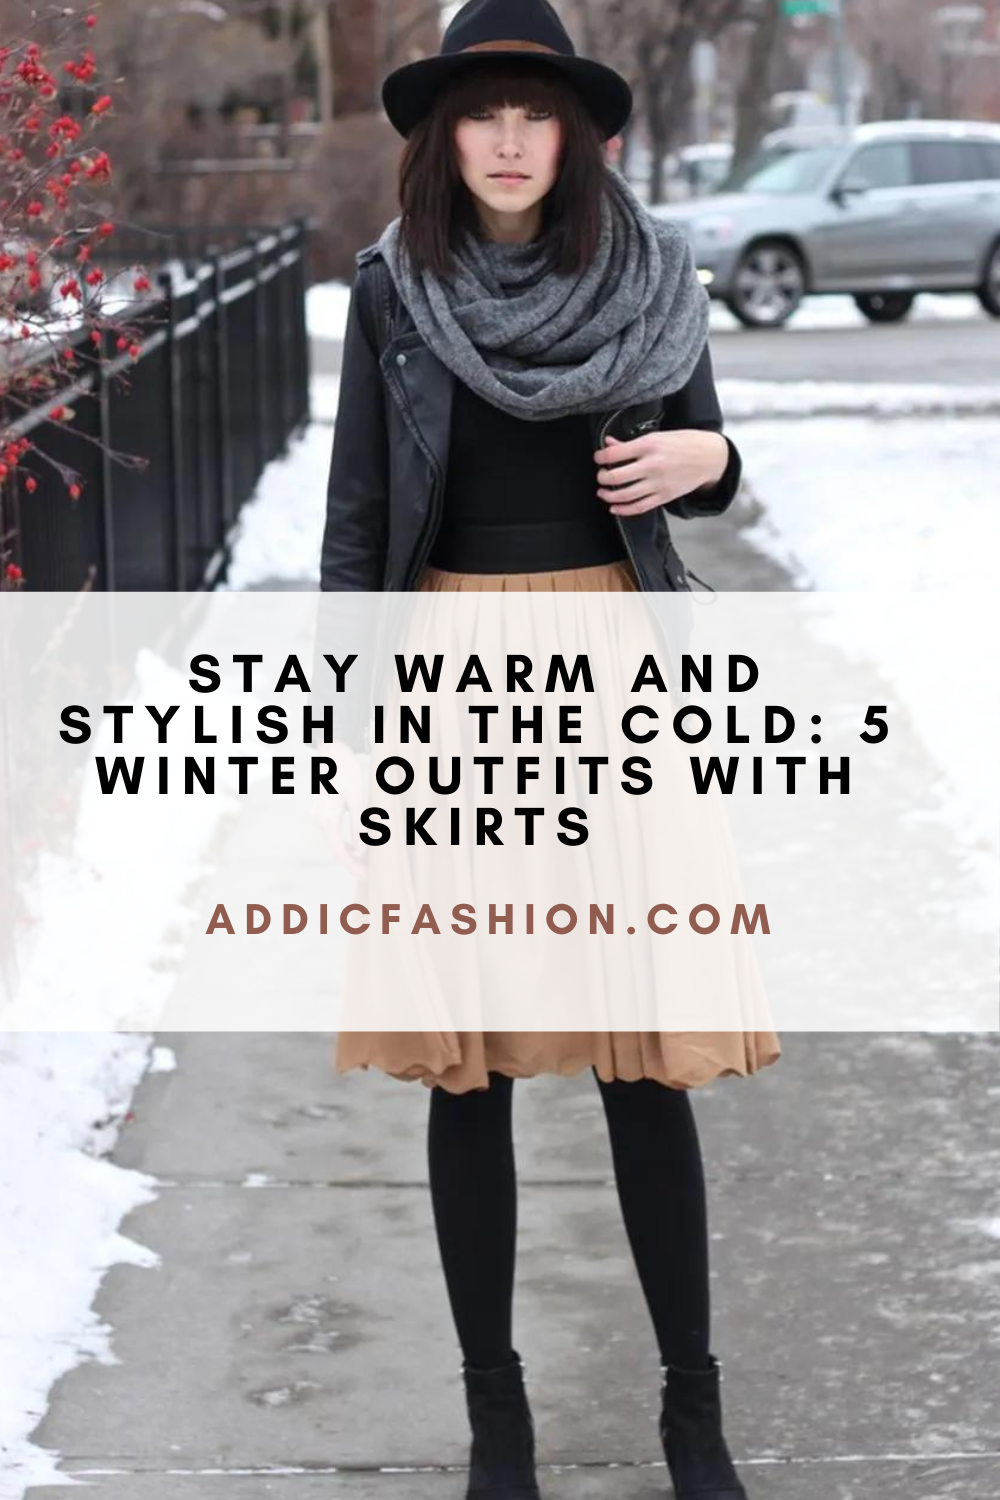 Stay Warm And Stylish In The Cold: 5 Winter Outfits With Skirts